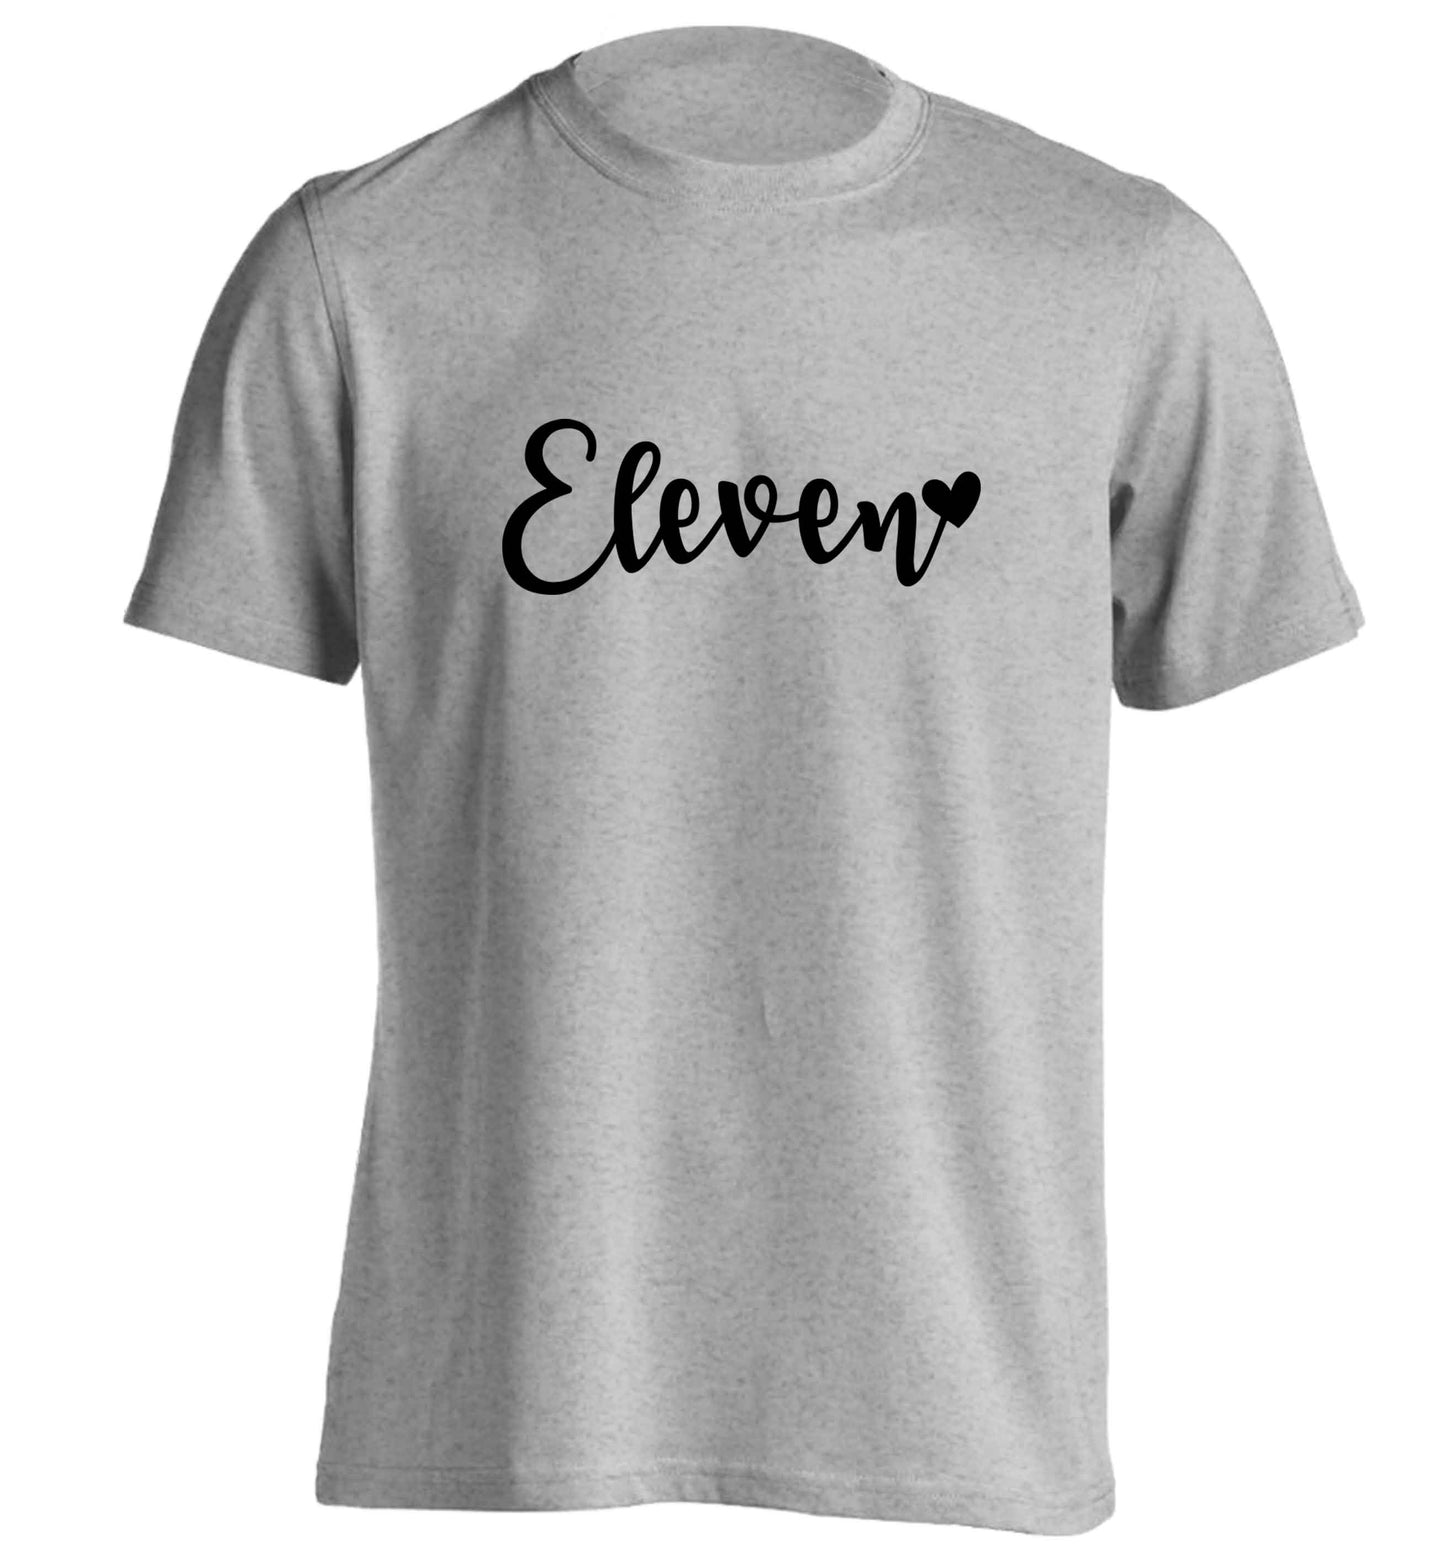 Eleven and heart! adults unisex grey Tshirt 2XL